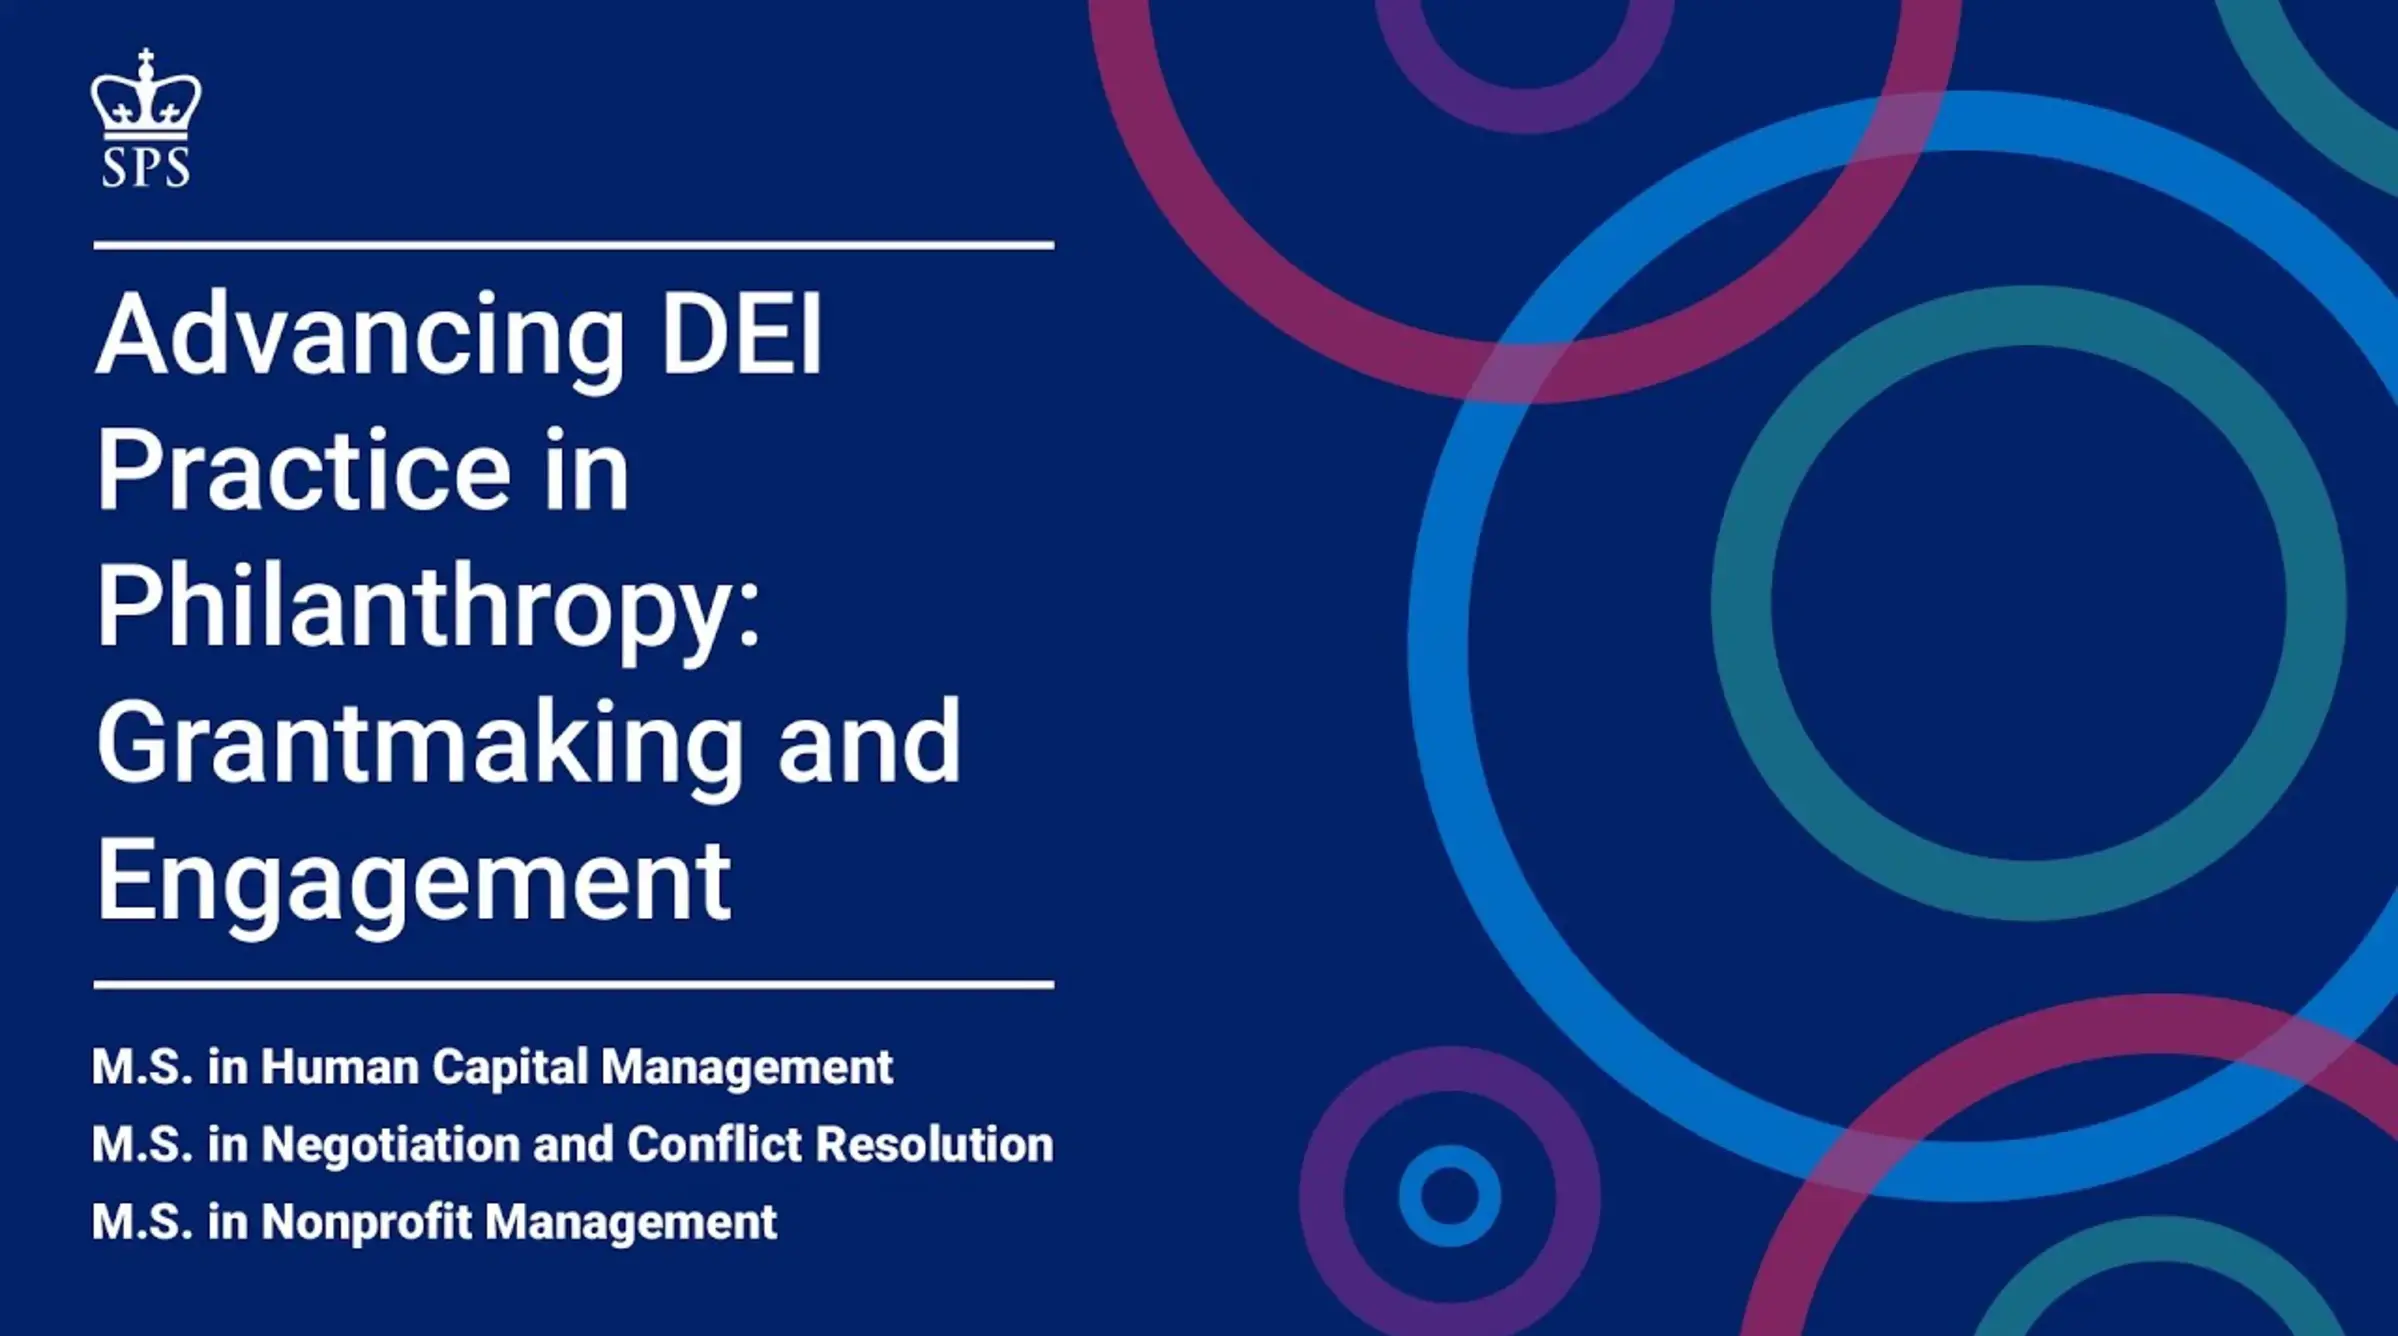 Advancing DEI Practice in Philanthropy: Grantmaking and Engagement